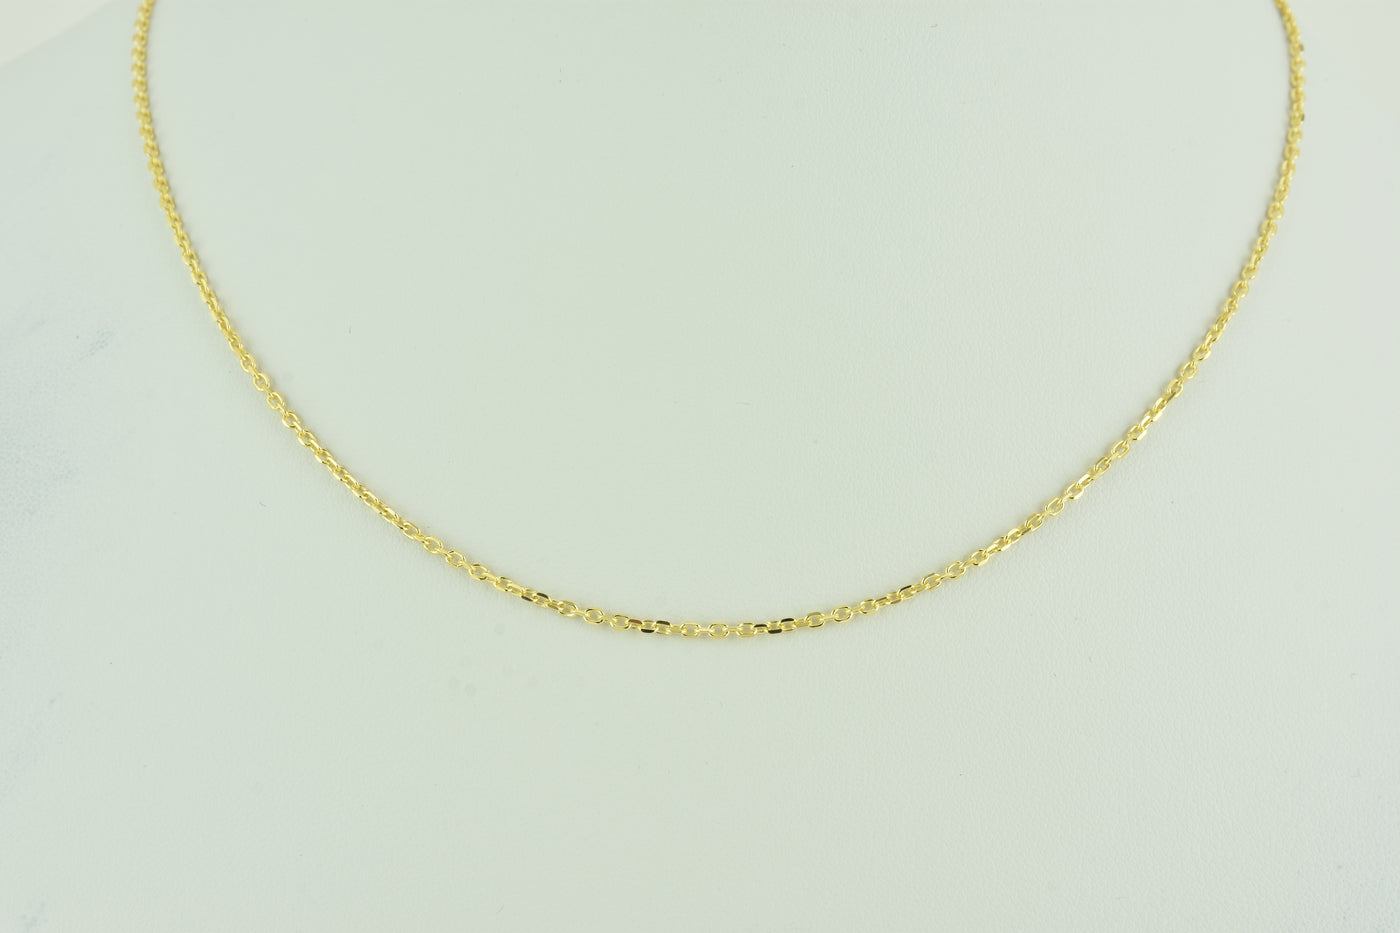 Delicate Link Italian Sterling Silver Chain in Yellow Gold plate